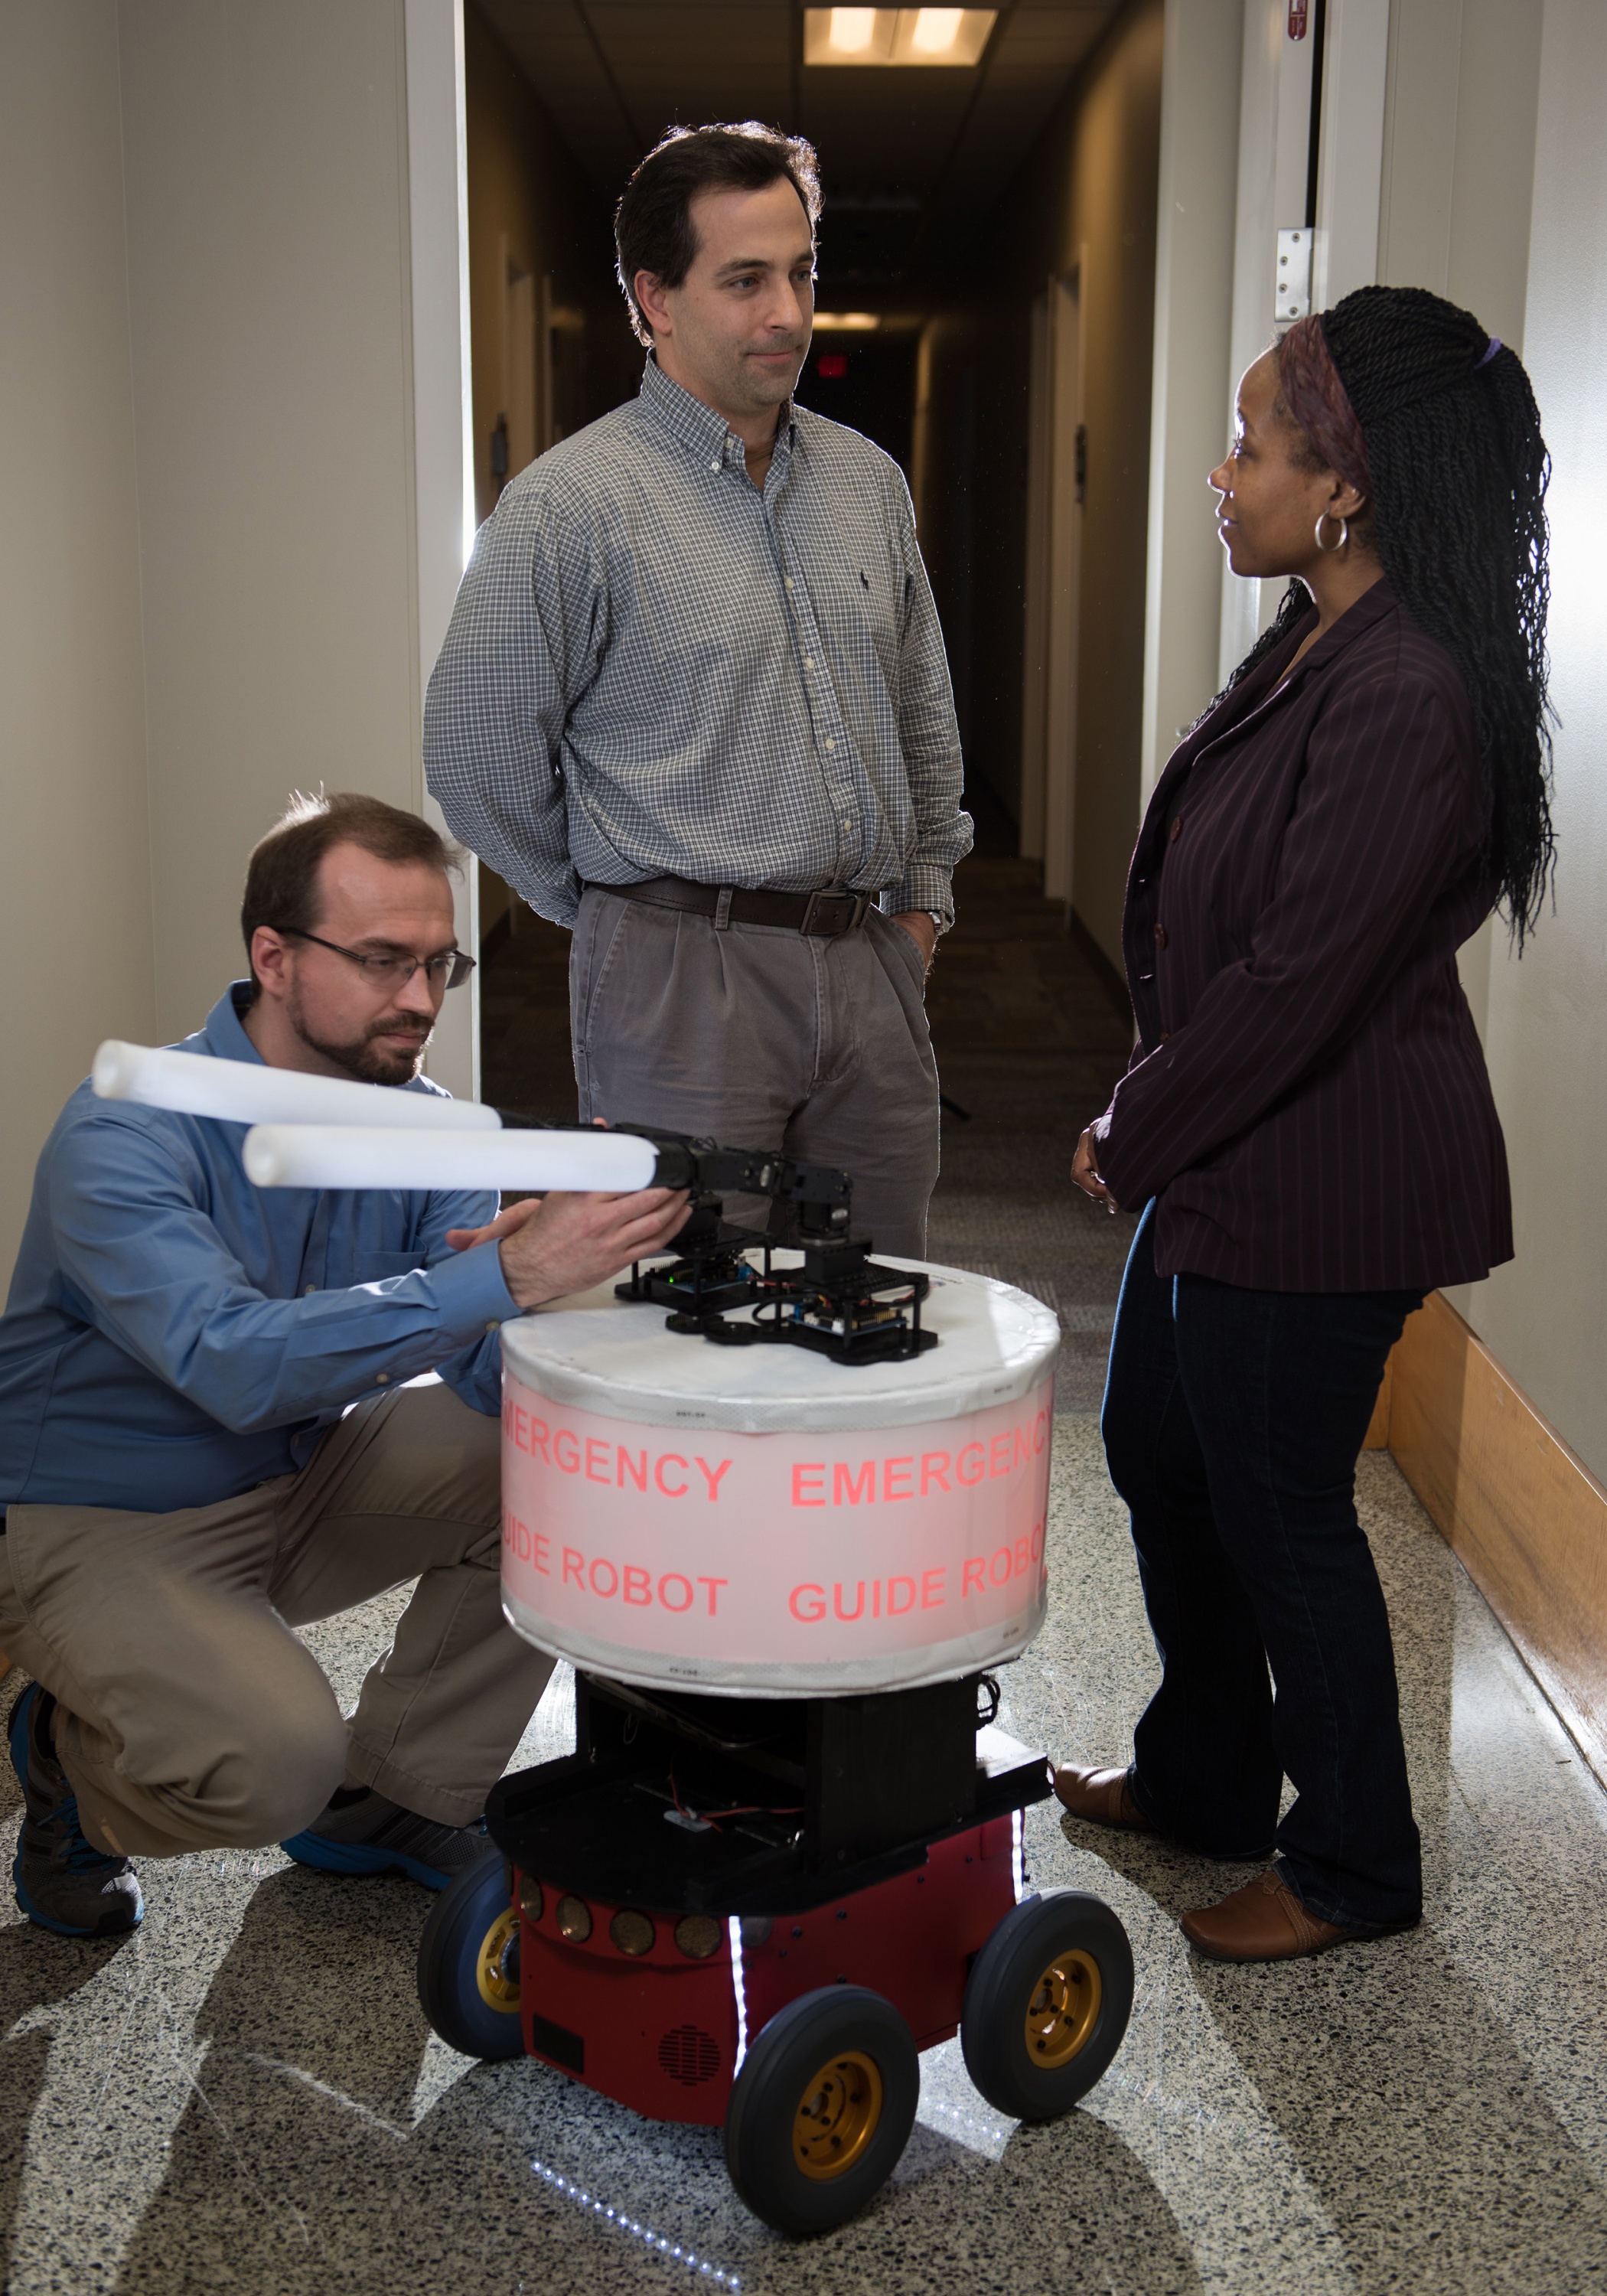 GTRI Research Engineer Paul Robinette adjusts the “arms” on the “Rescue Robot,” while (L-R) GTRI Senior Research Engineer Alan Wagner and School of Electrical and Computer Engineering Professor Ayanna Howard look on. (Credit: Rob Felt, Georgia Tech)